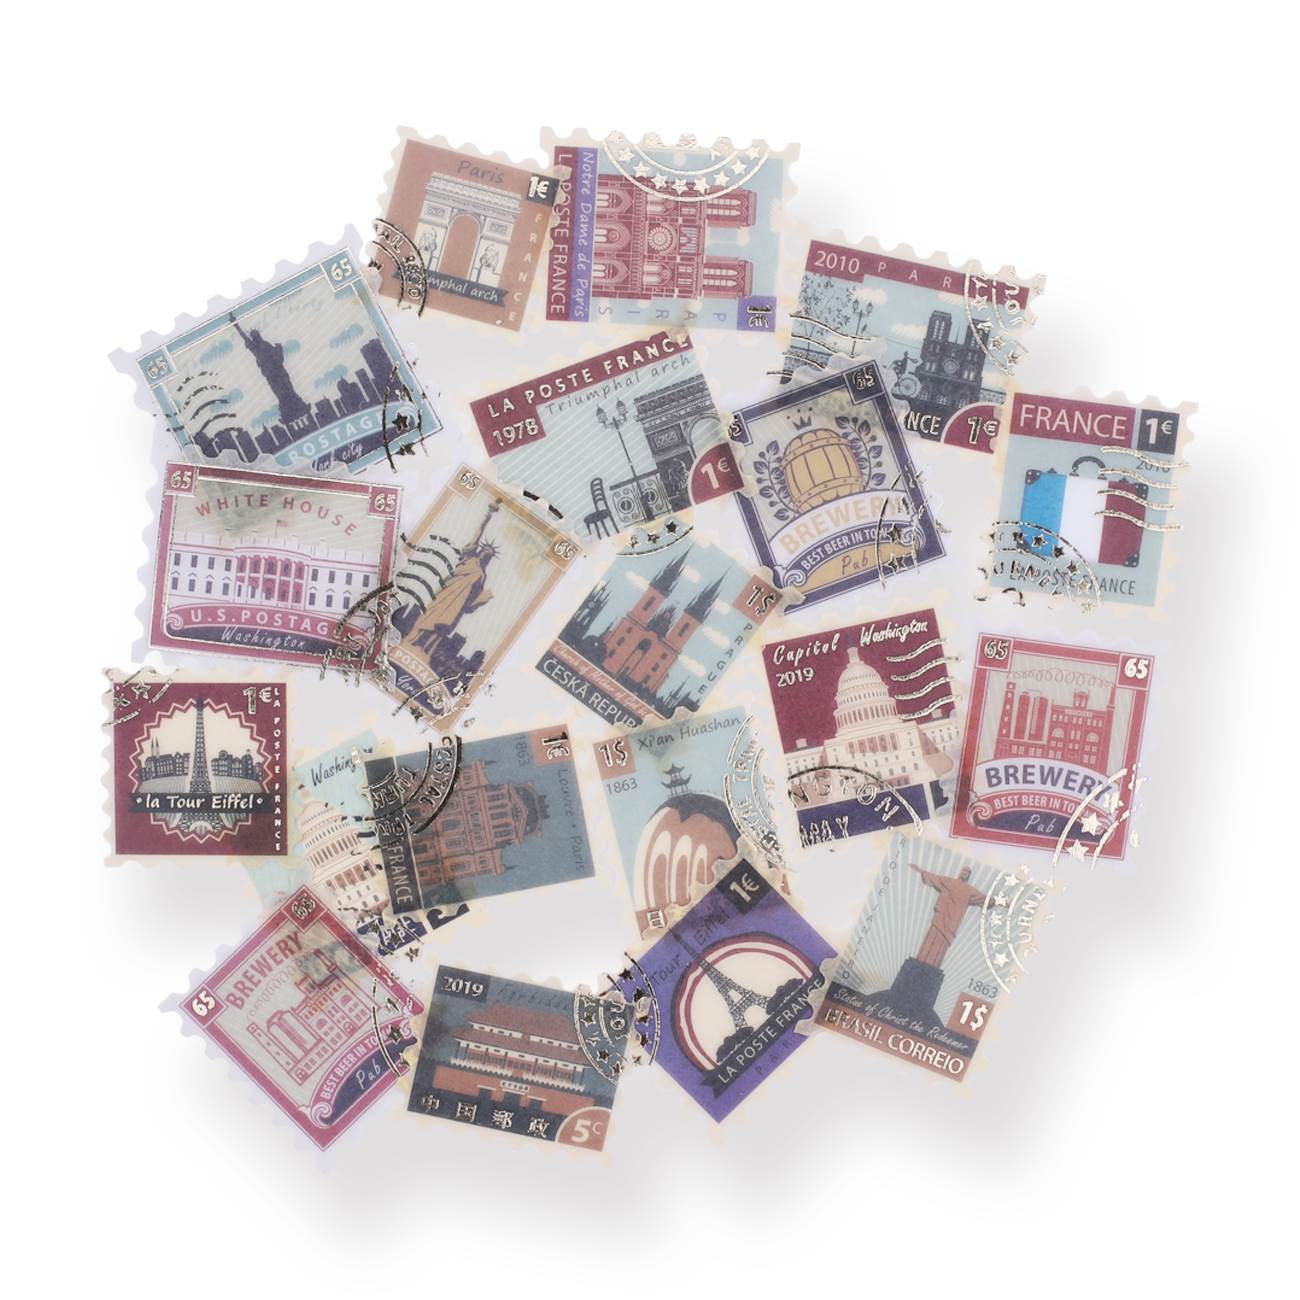 Ole Star 10 Packs of Adhesive Stickers Vintage Post Stamps Decorative Stickers 800pcs